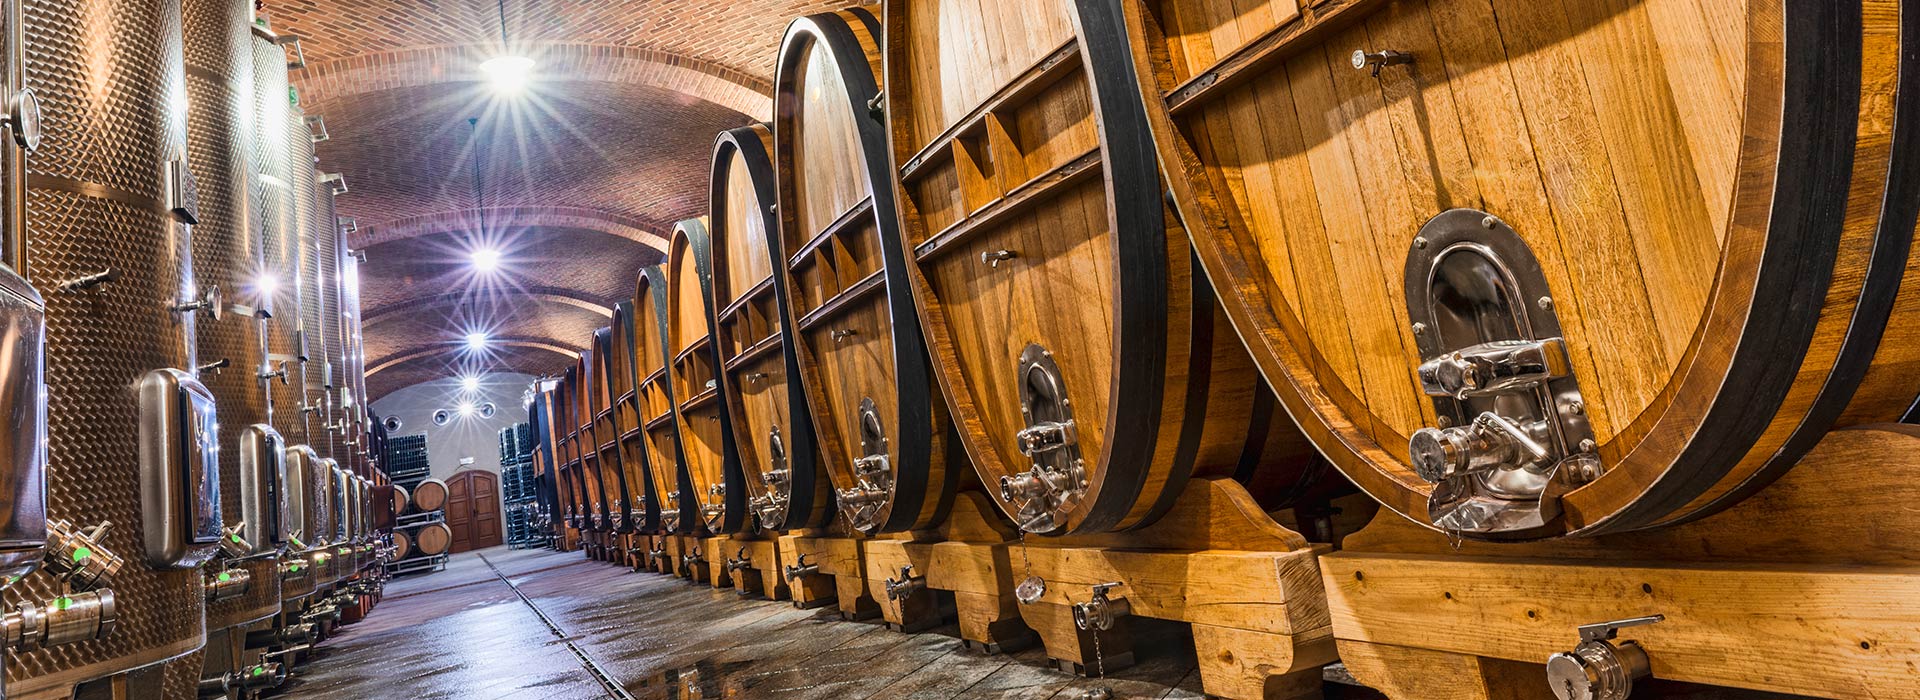 Explore Wineries and Wine Cellars of Italy